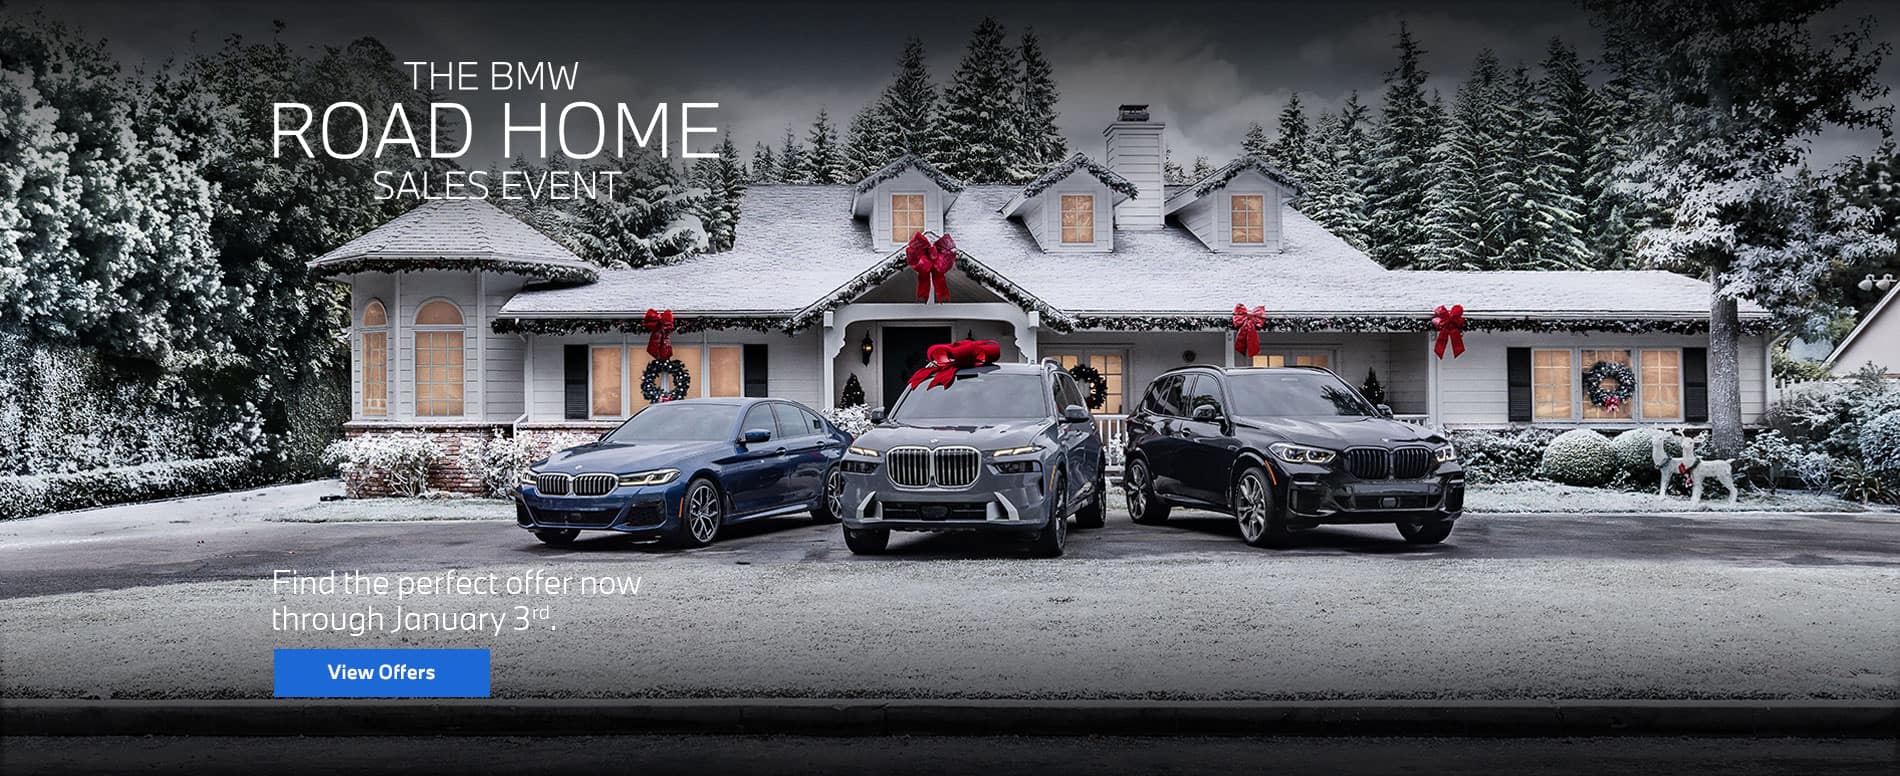 Find the perfect offer now through January 3rd.